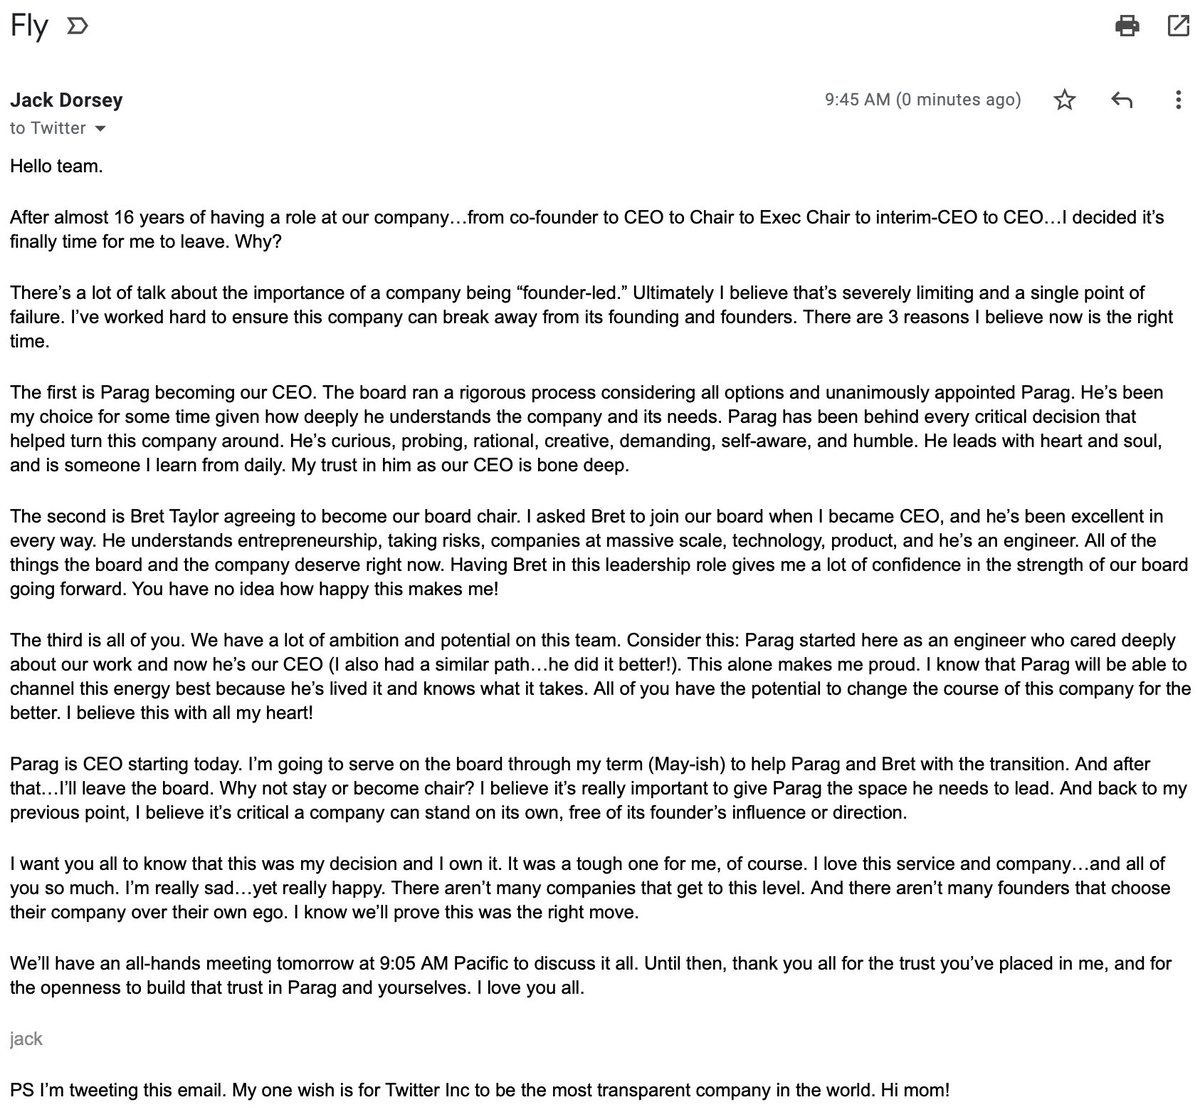 Jack Dorsey's email to twitter that announces he is stepping down as twitter's CEO.